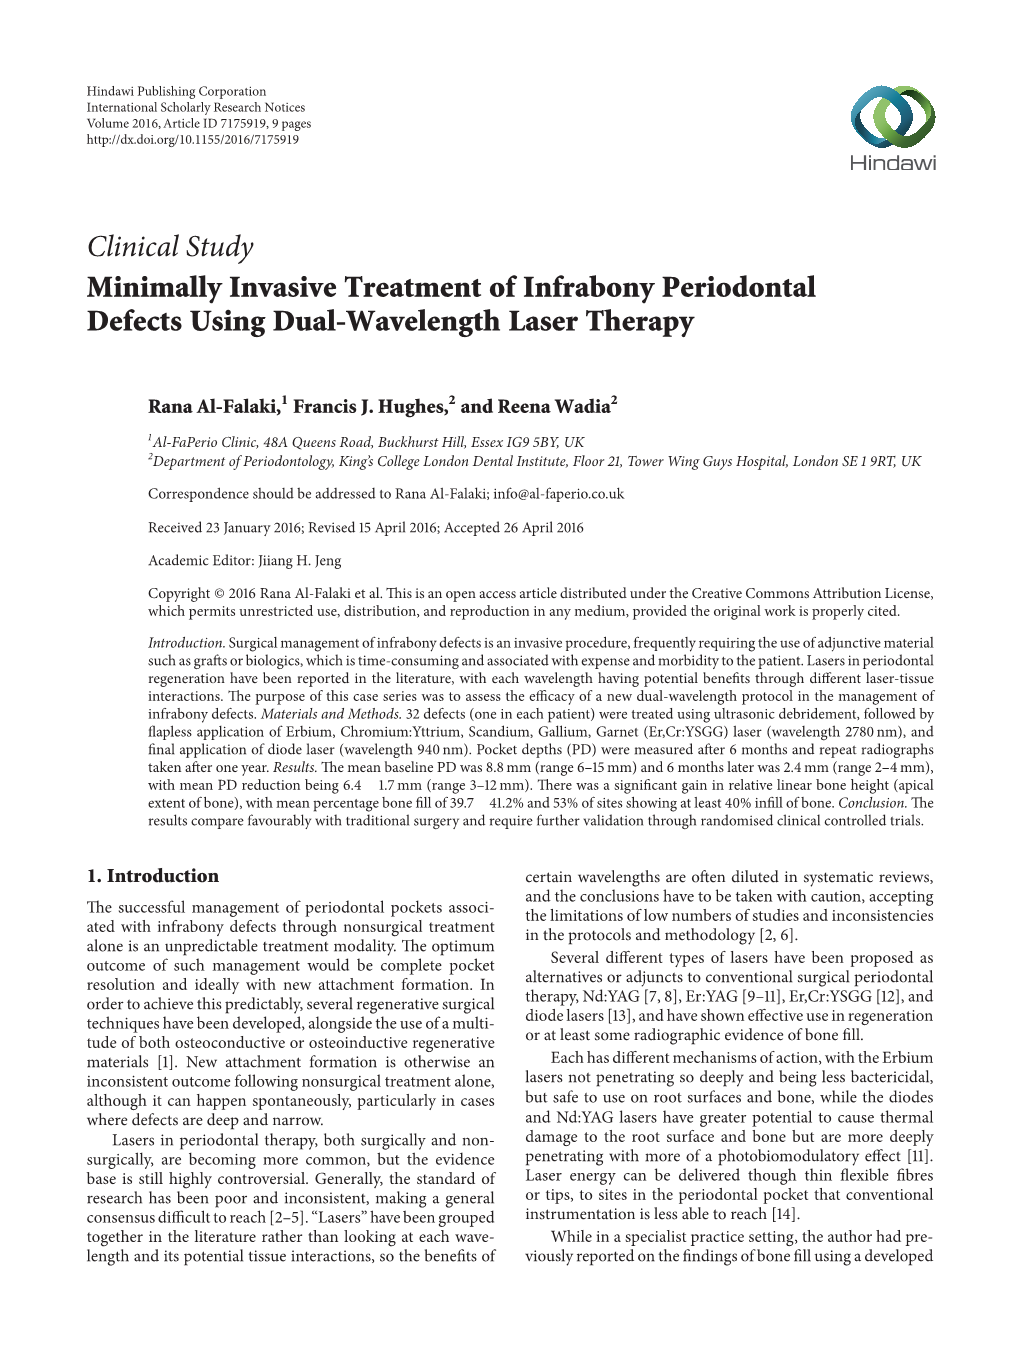 Clinical Study Minimally Invasive Treatment of Infrabony Periodontal Defects Using Dual-Wavelength Laser Therapy